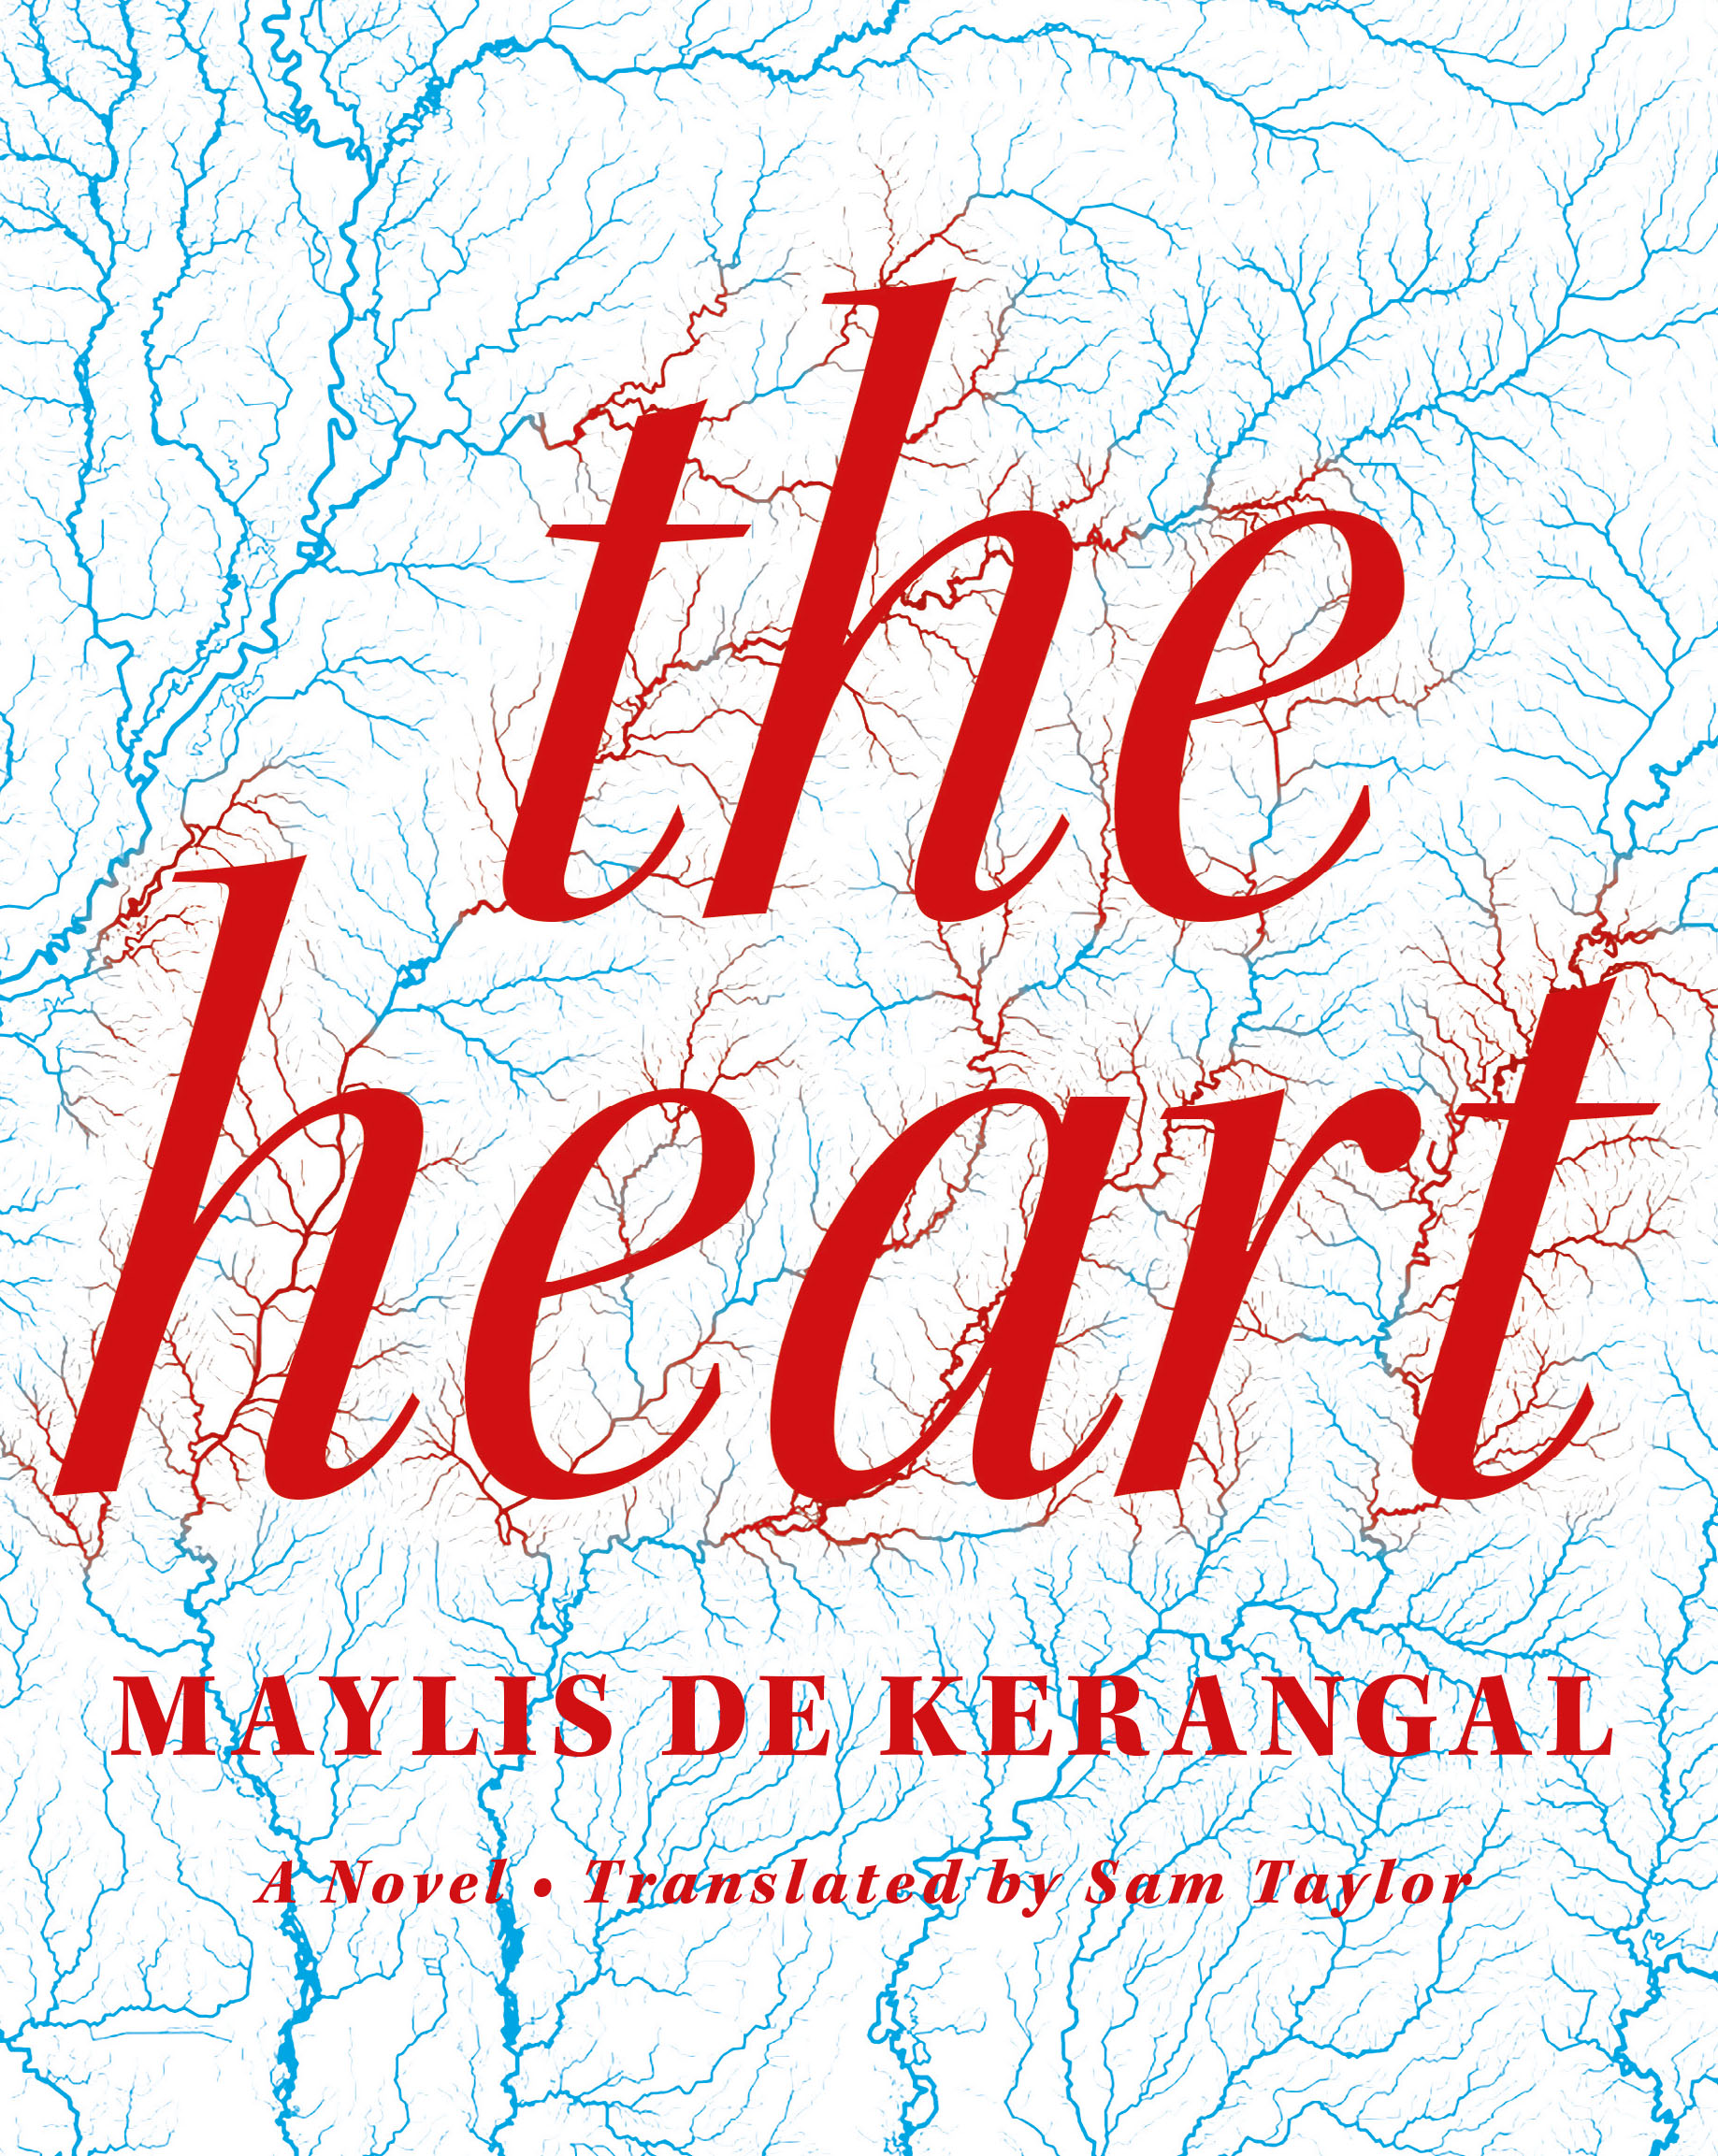 The Heart cover image